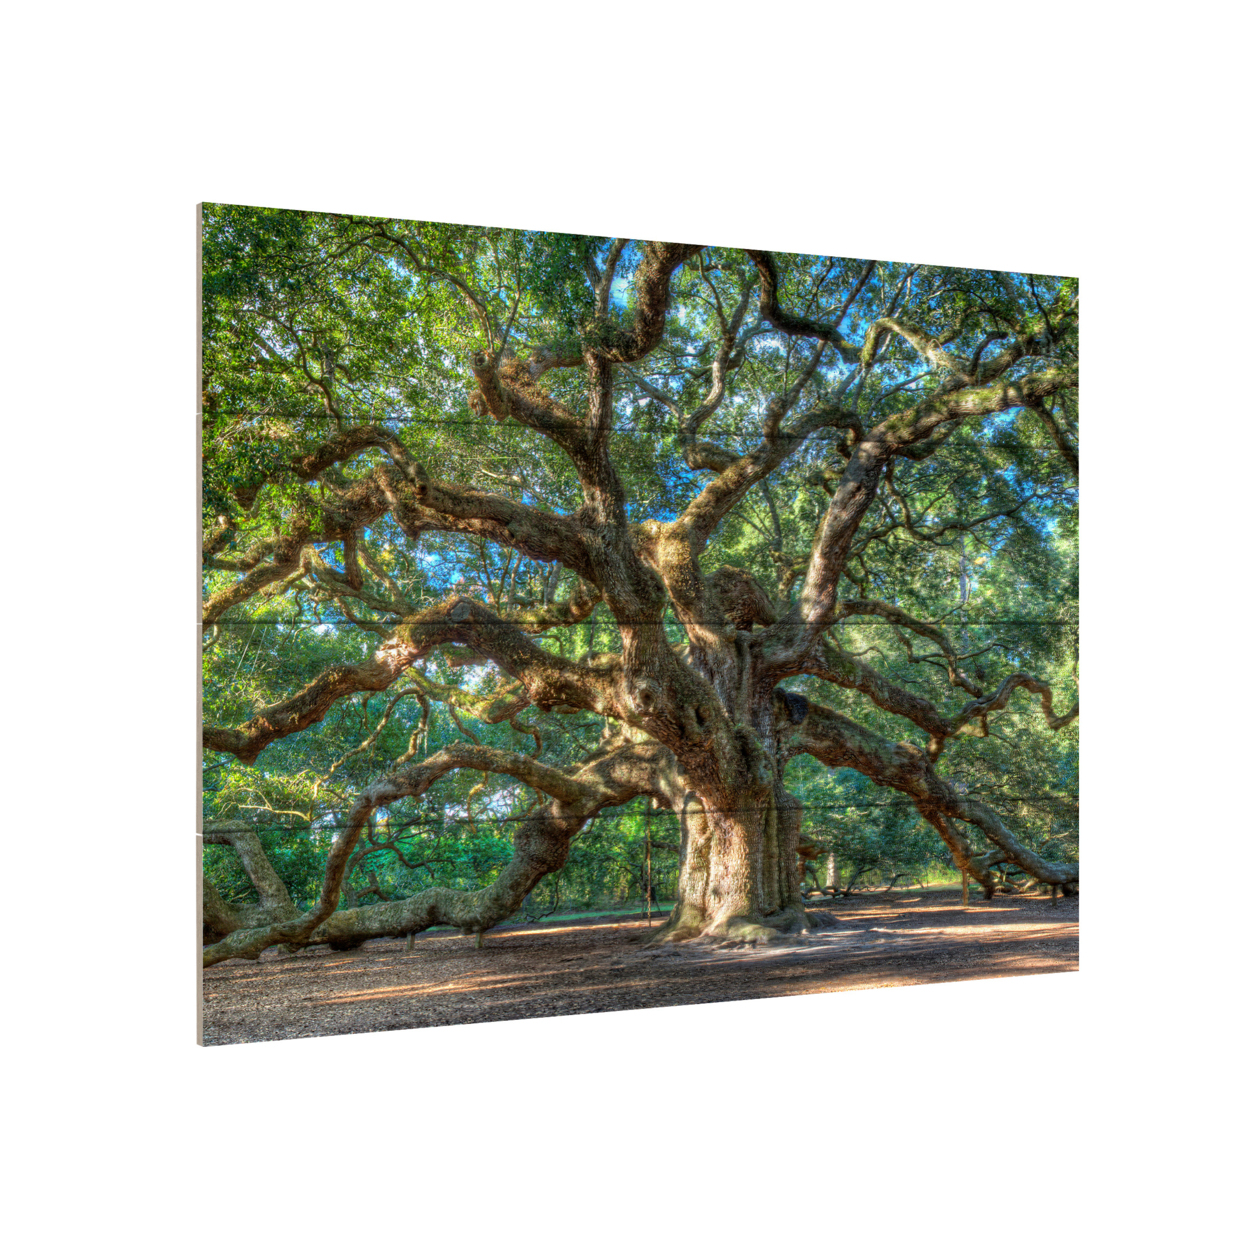 Wall Art 12 X 16 Inches Titled Angel Oak Charleston Ready To Hang Printed On Wooden Planks